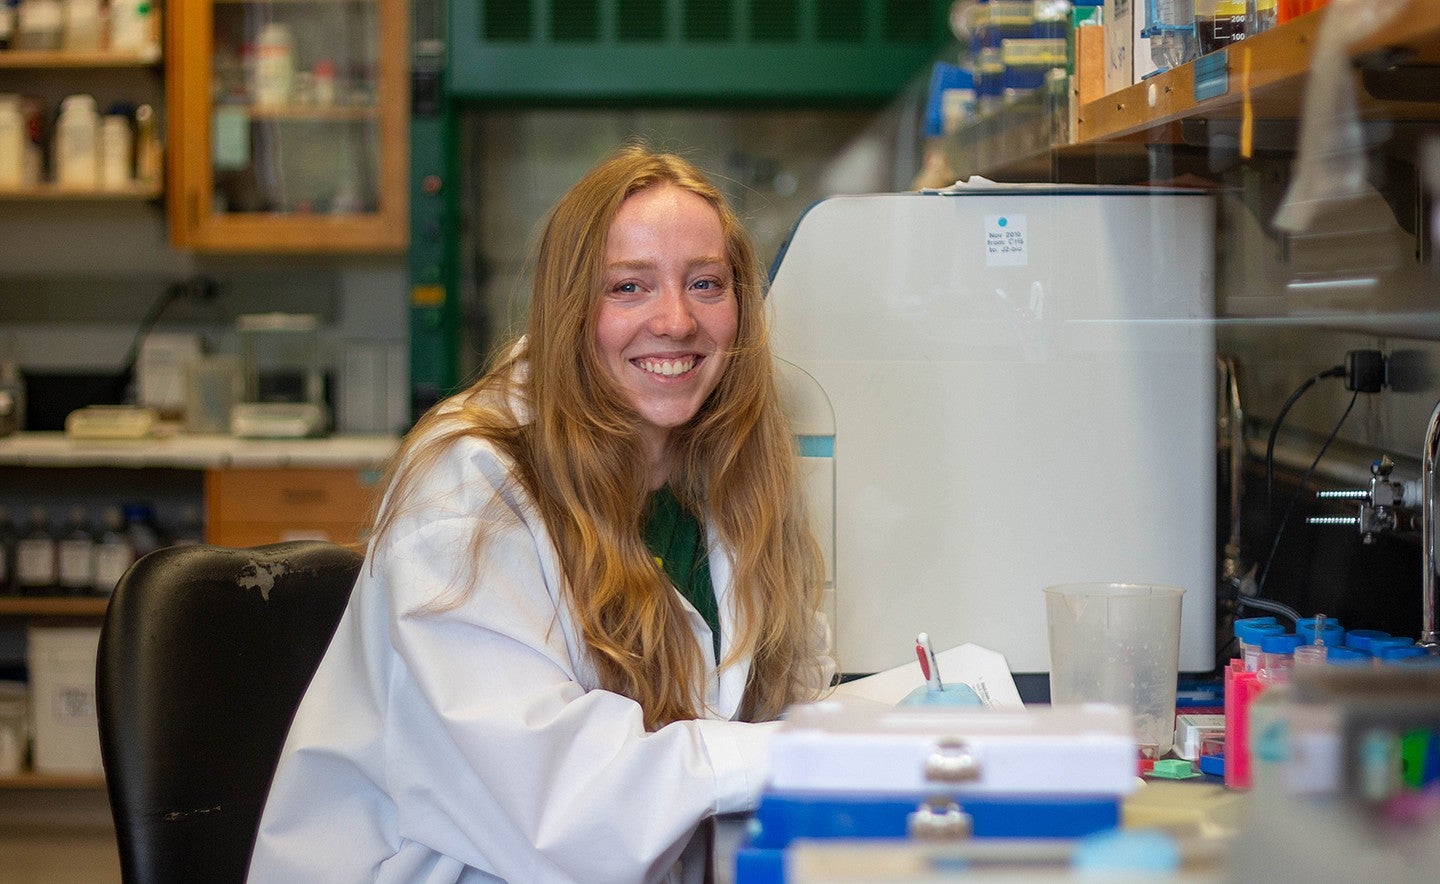 student in lab coat seated at lab bench, holding pen and smiling over her shoulder